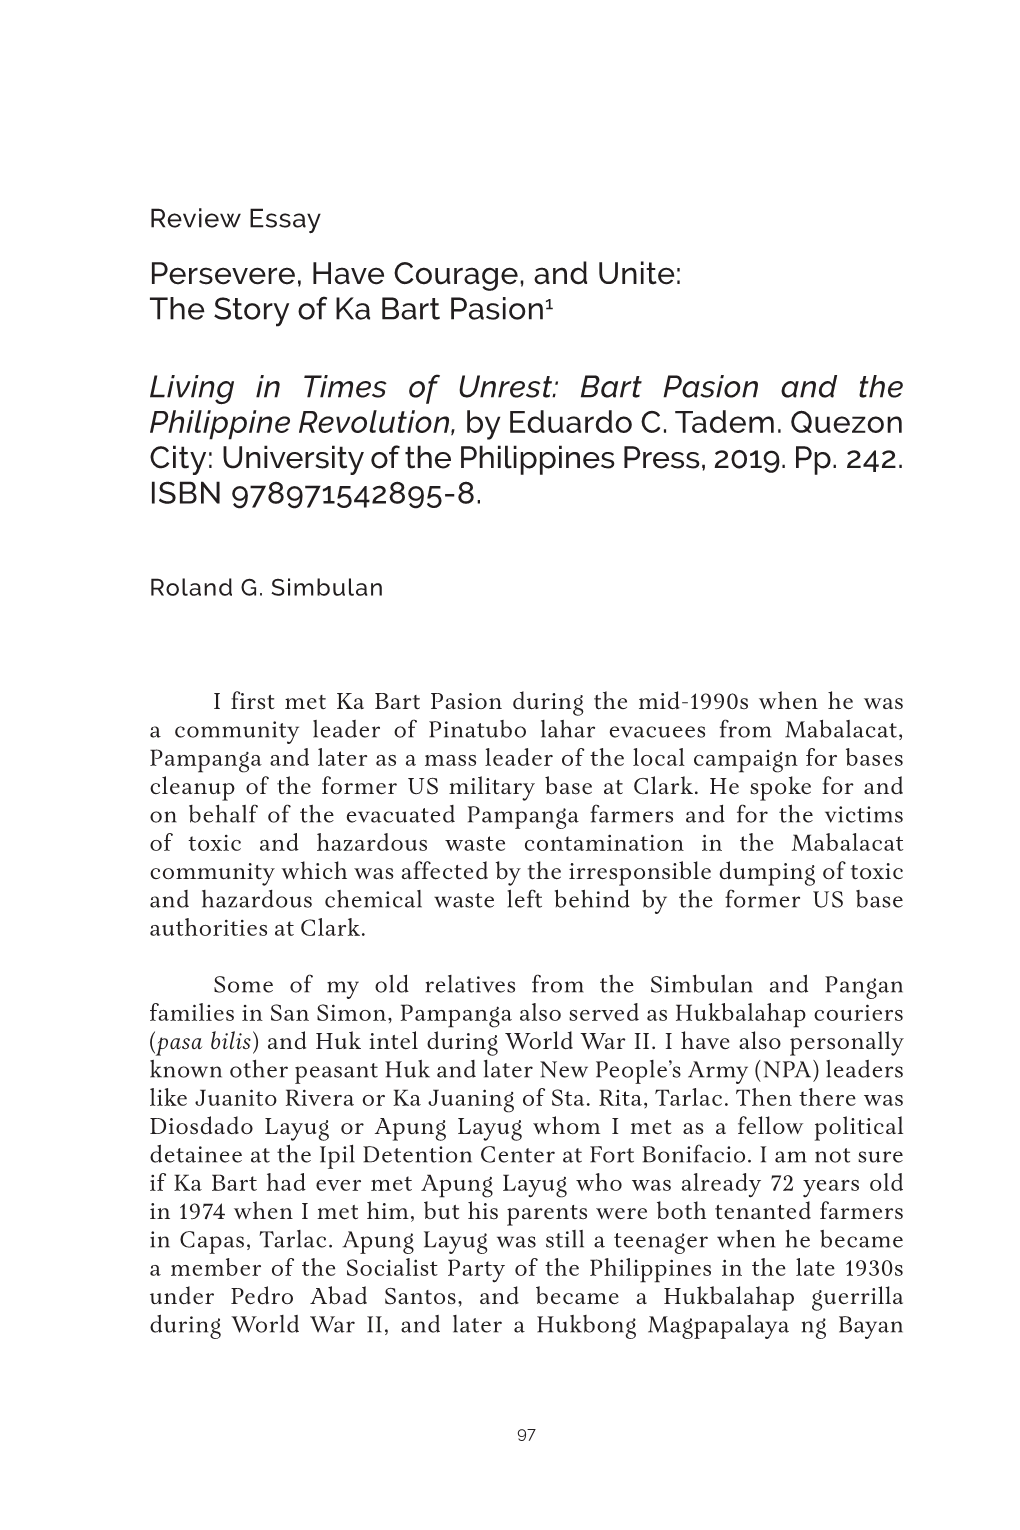 Bart Pasion and the Philippine Revolution, by Eduardo C